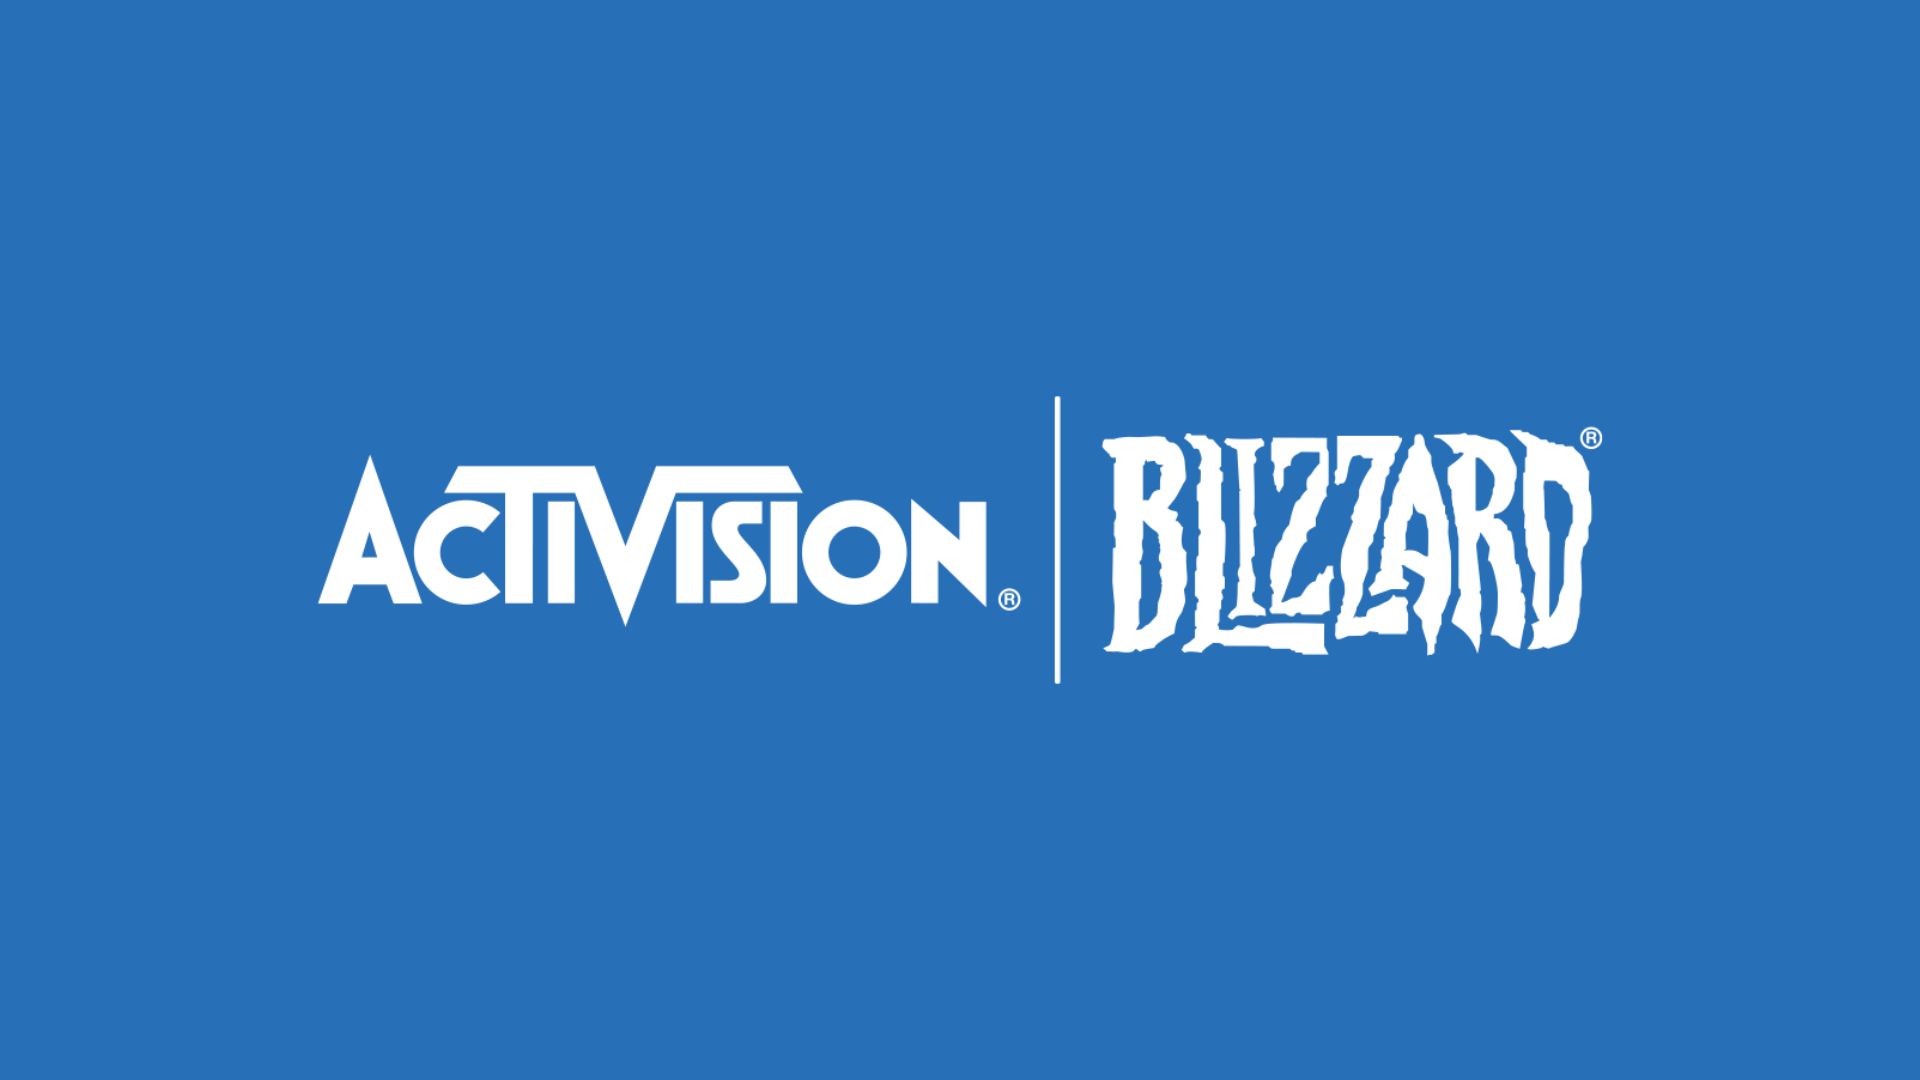 Video Gamers To Indict Microsoft Corp Over Its $68.7 Billion Acquisition Of Activision